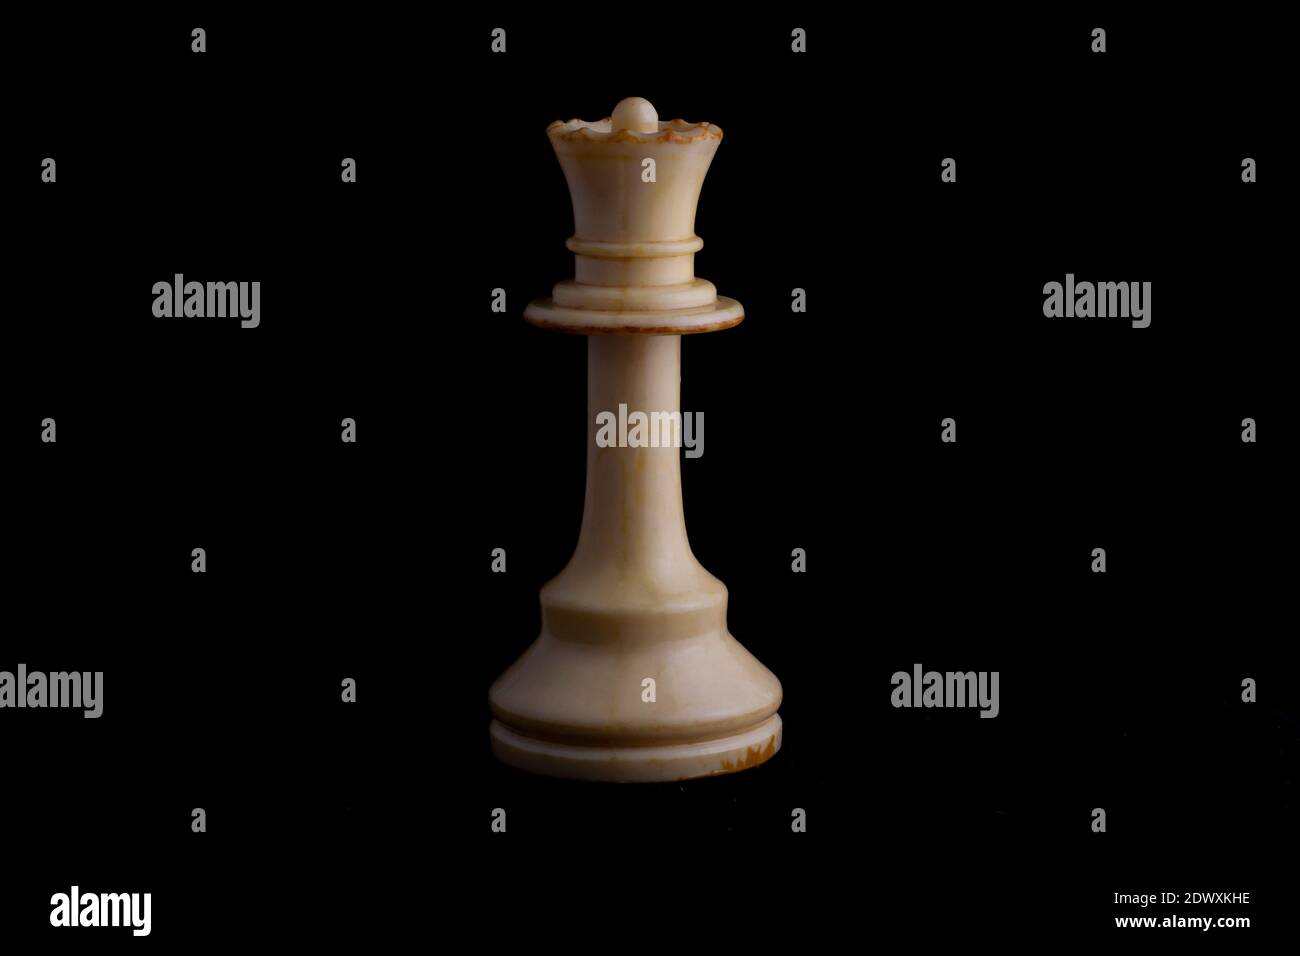 one side light on white queen chess piece in black background Stock Photo